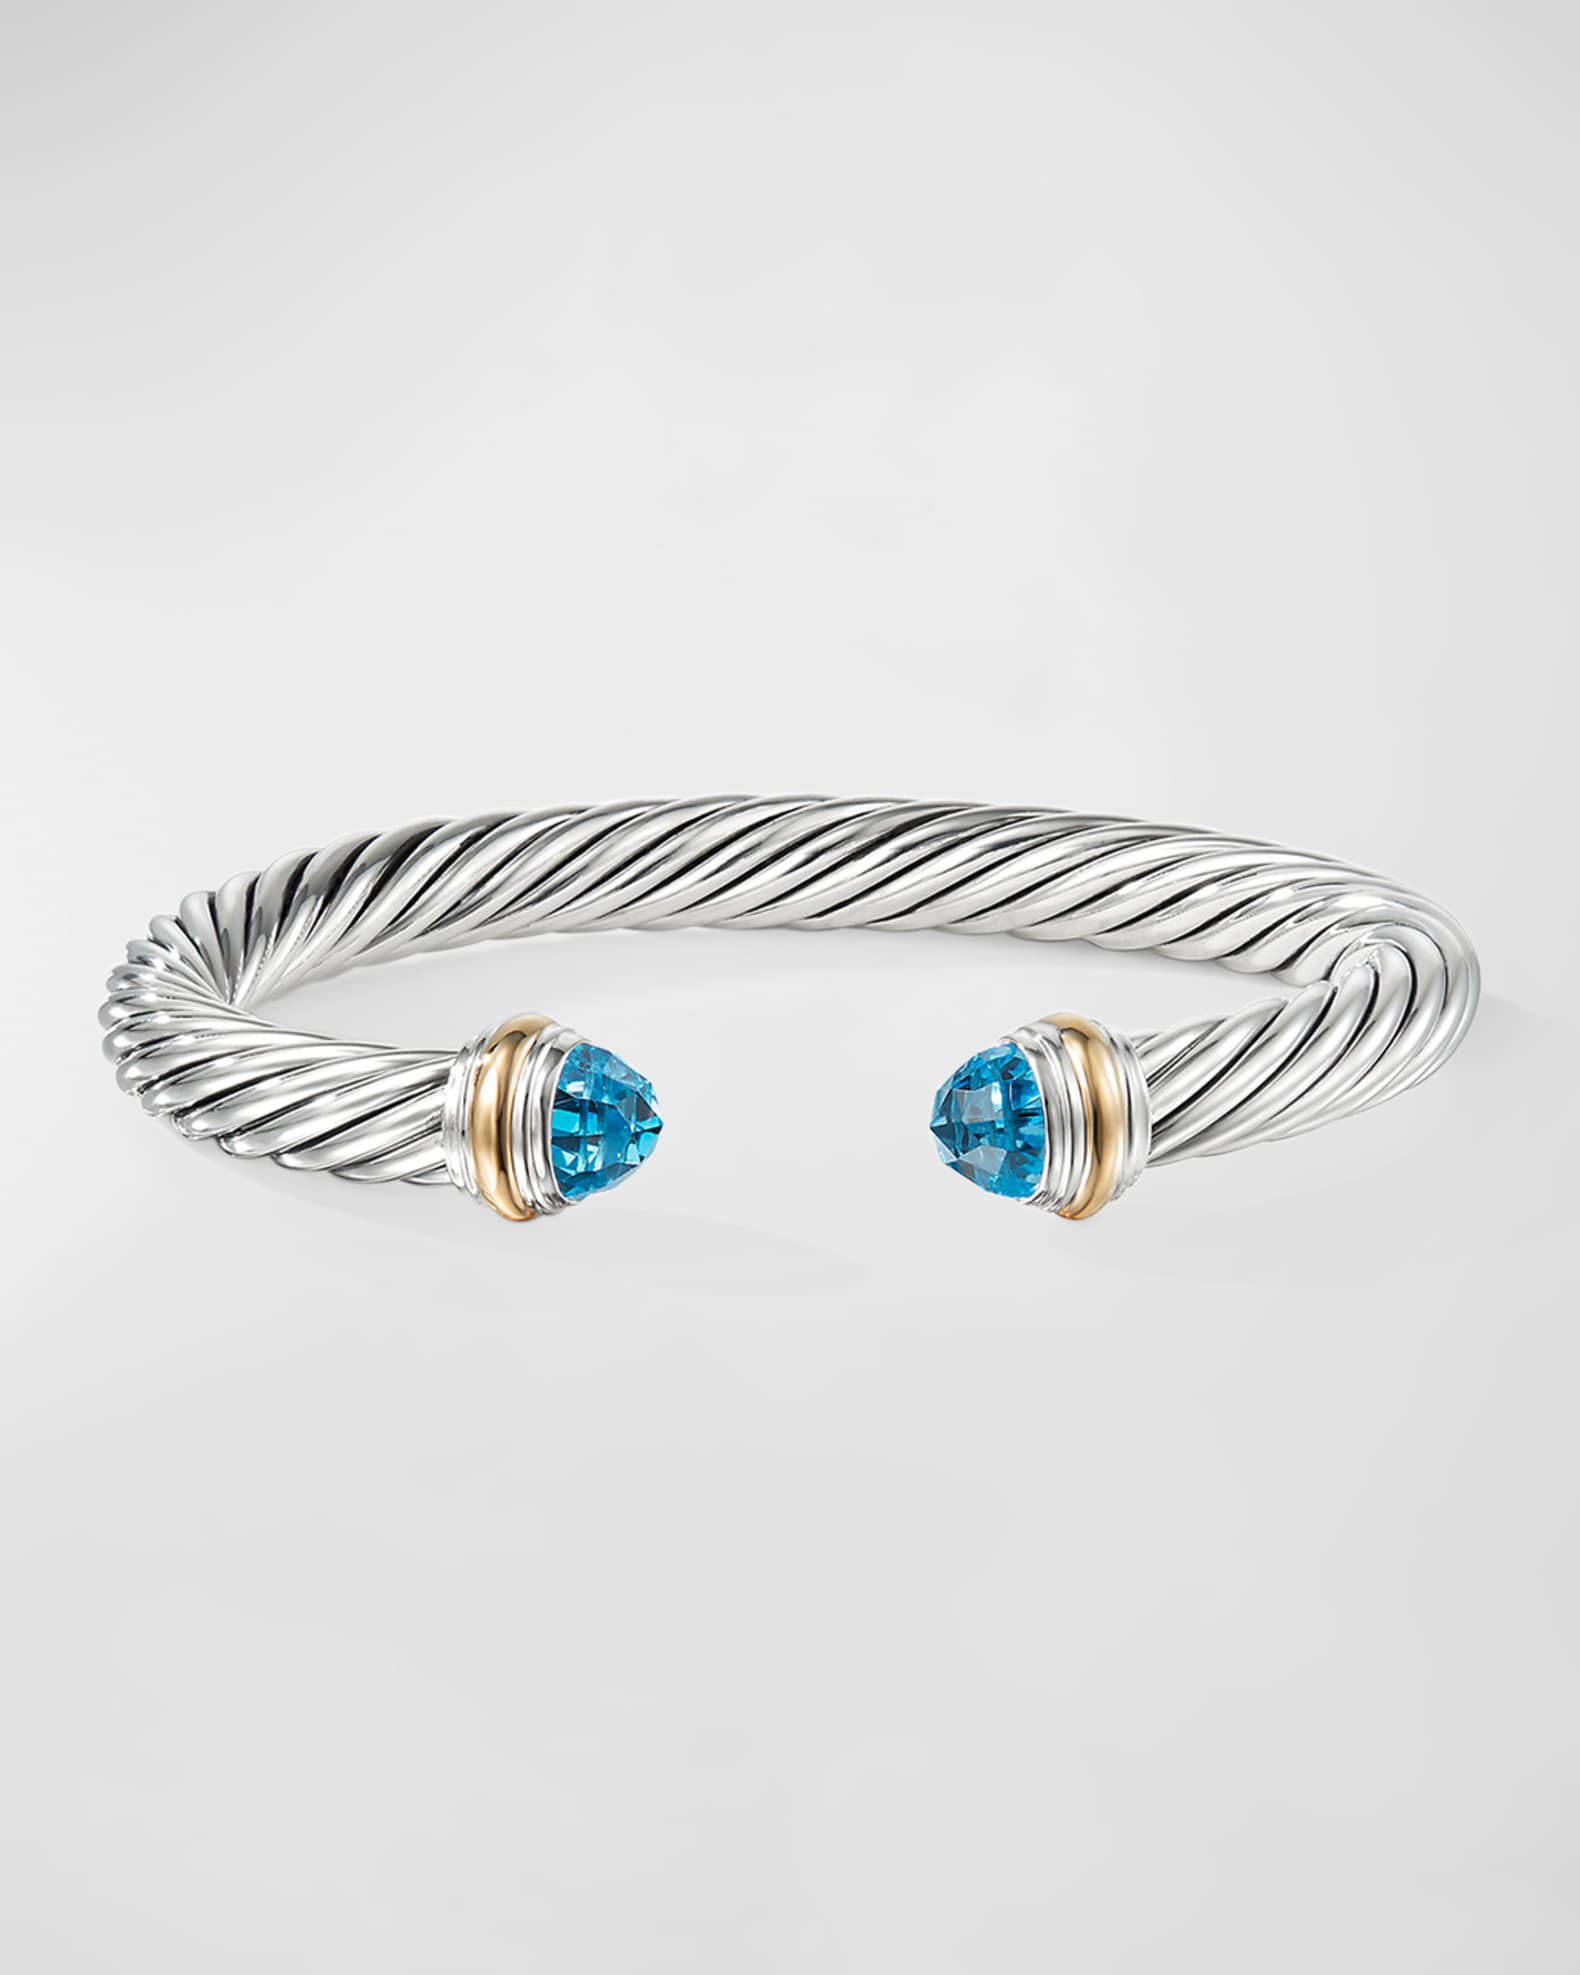 David Yurman Cable Bracelet with Gemstone and 14K Gold in Silver, 7mm ...